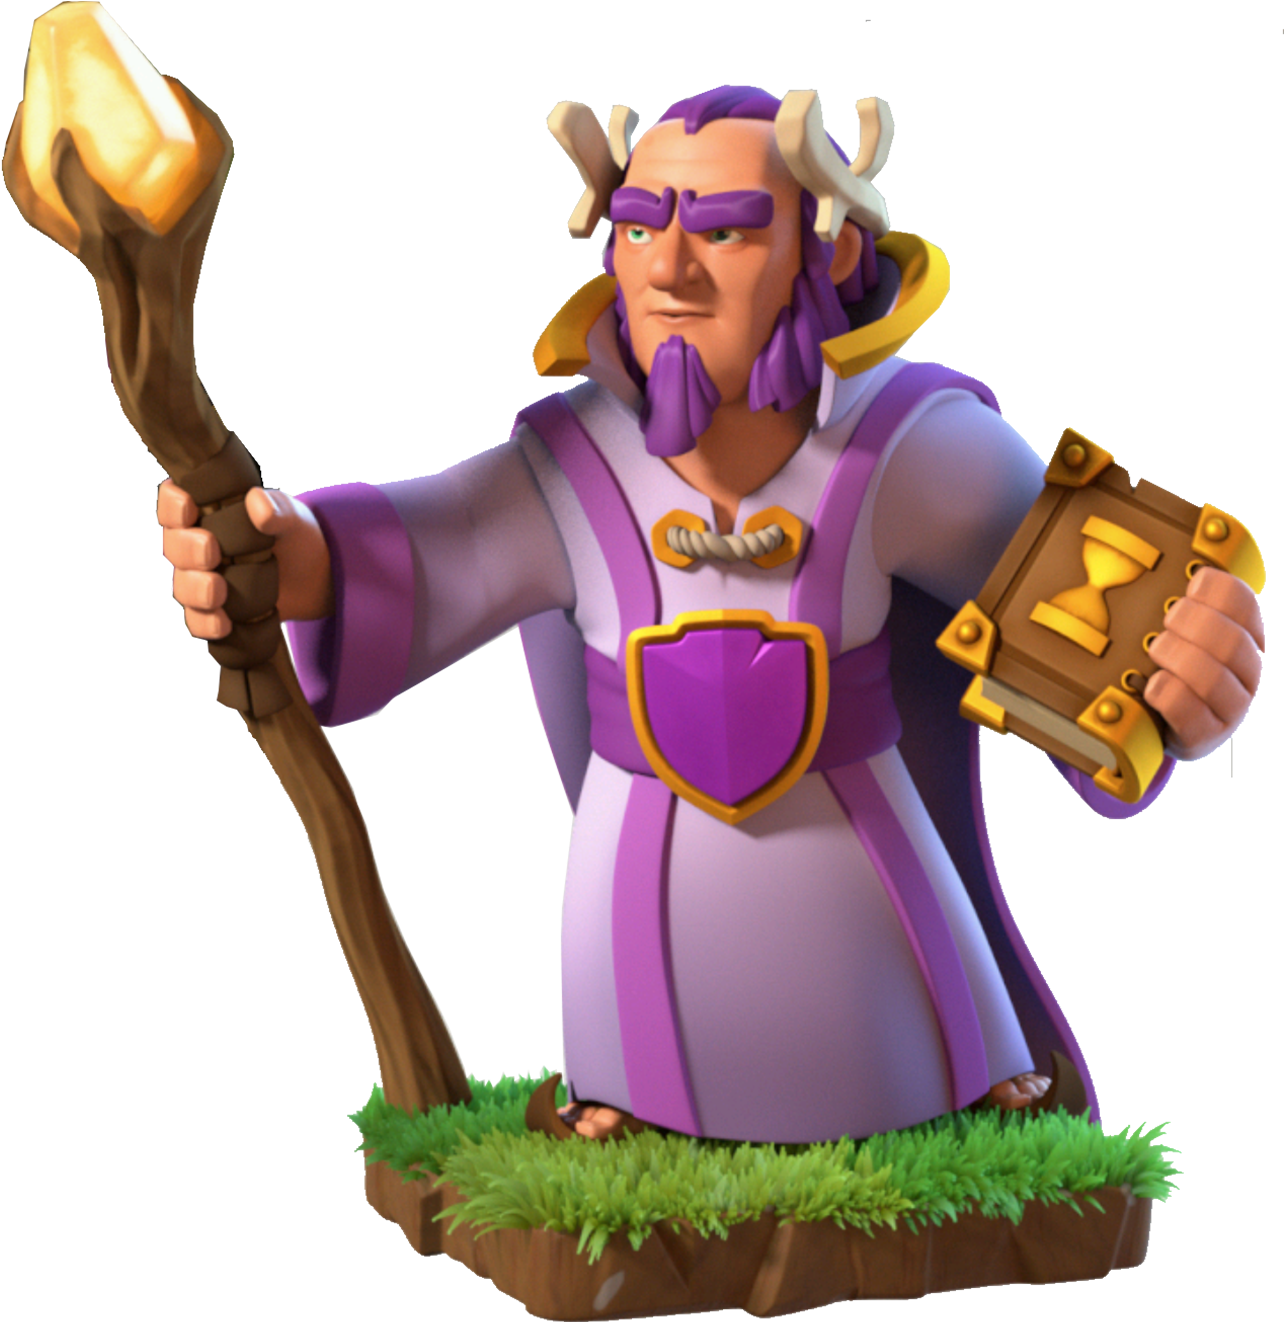 Clashof Clans Mage Character